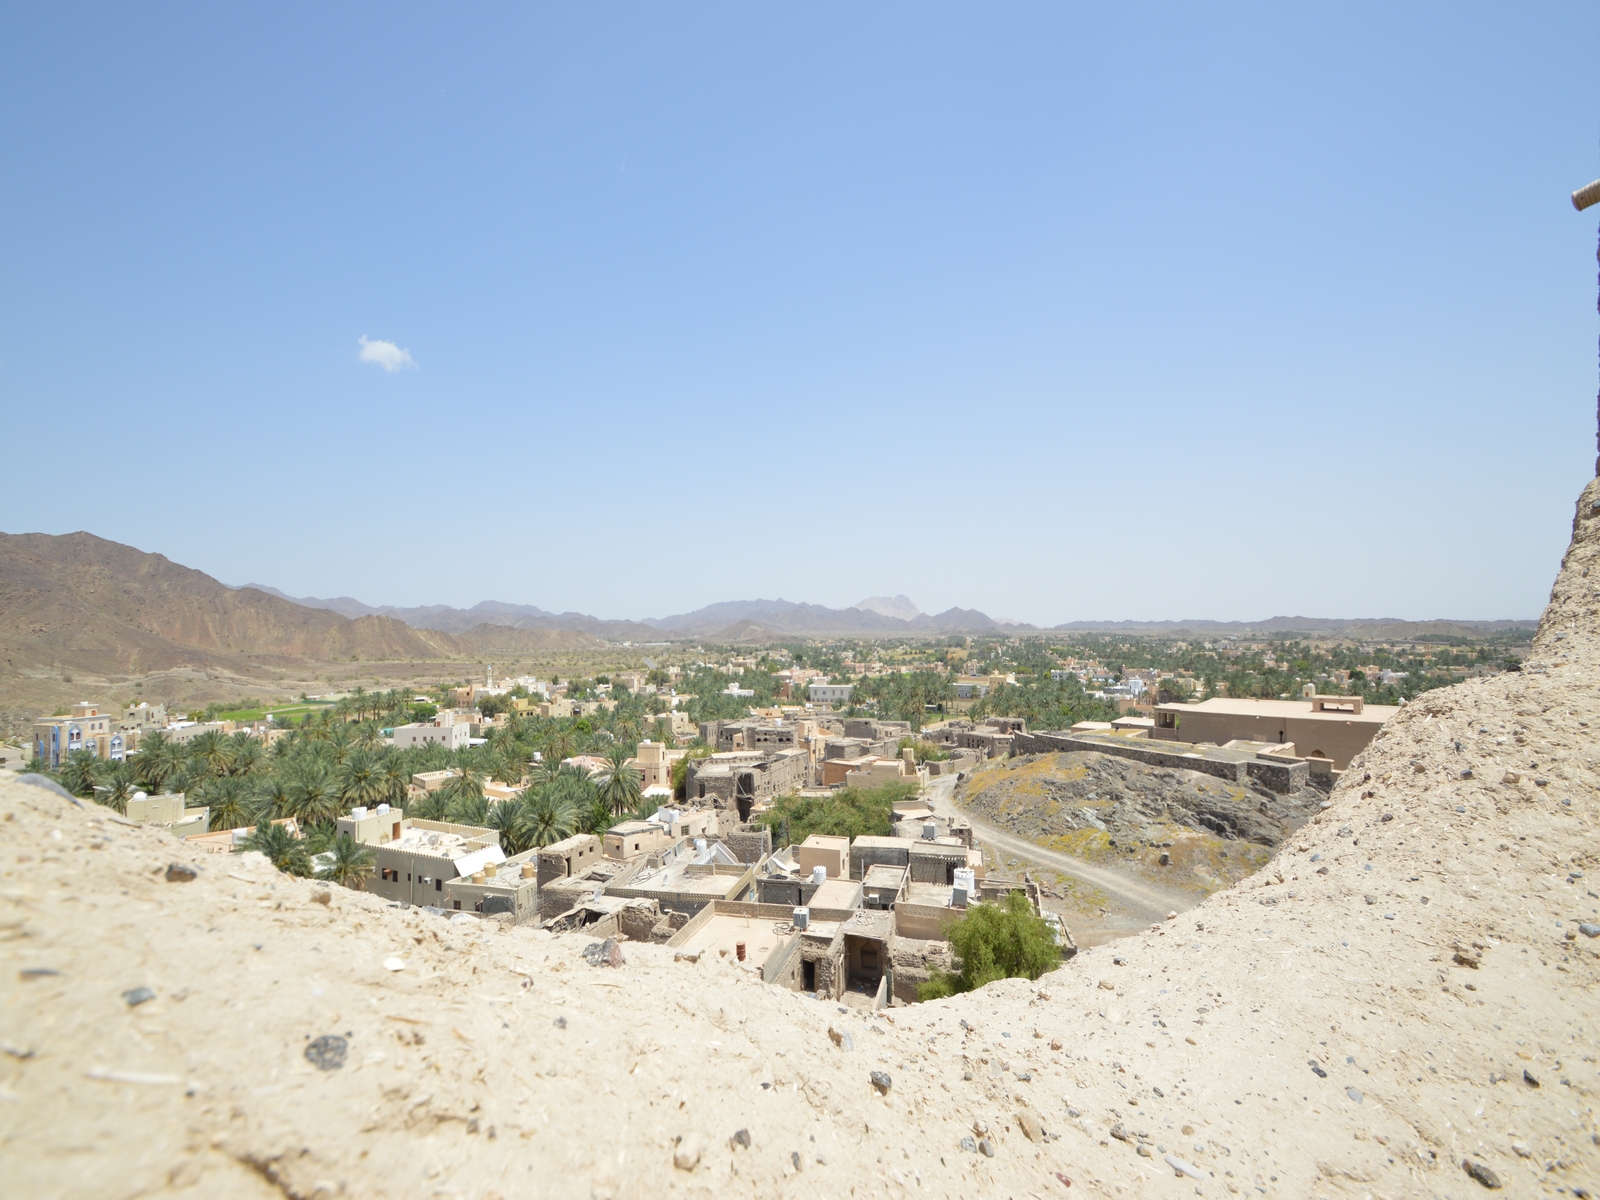 Bahla is probably the most established town in the Sultanate 40